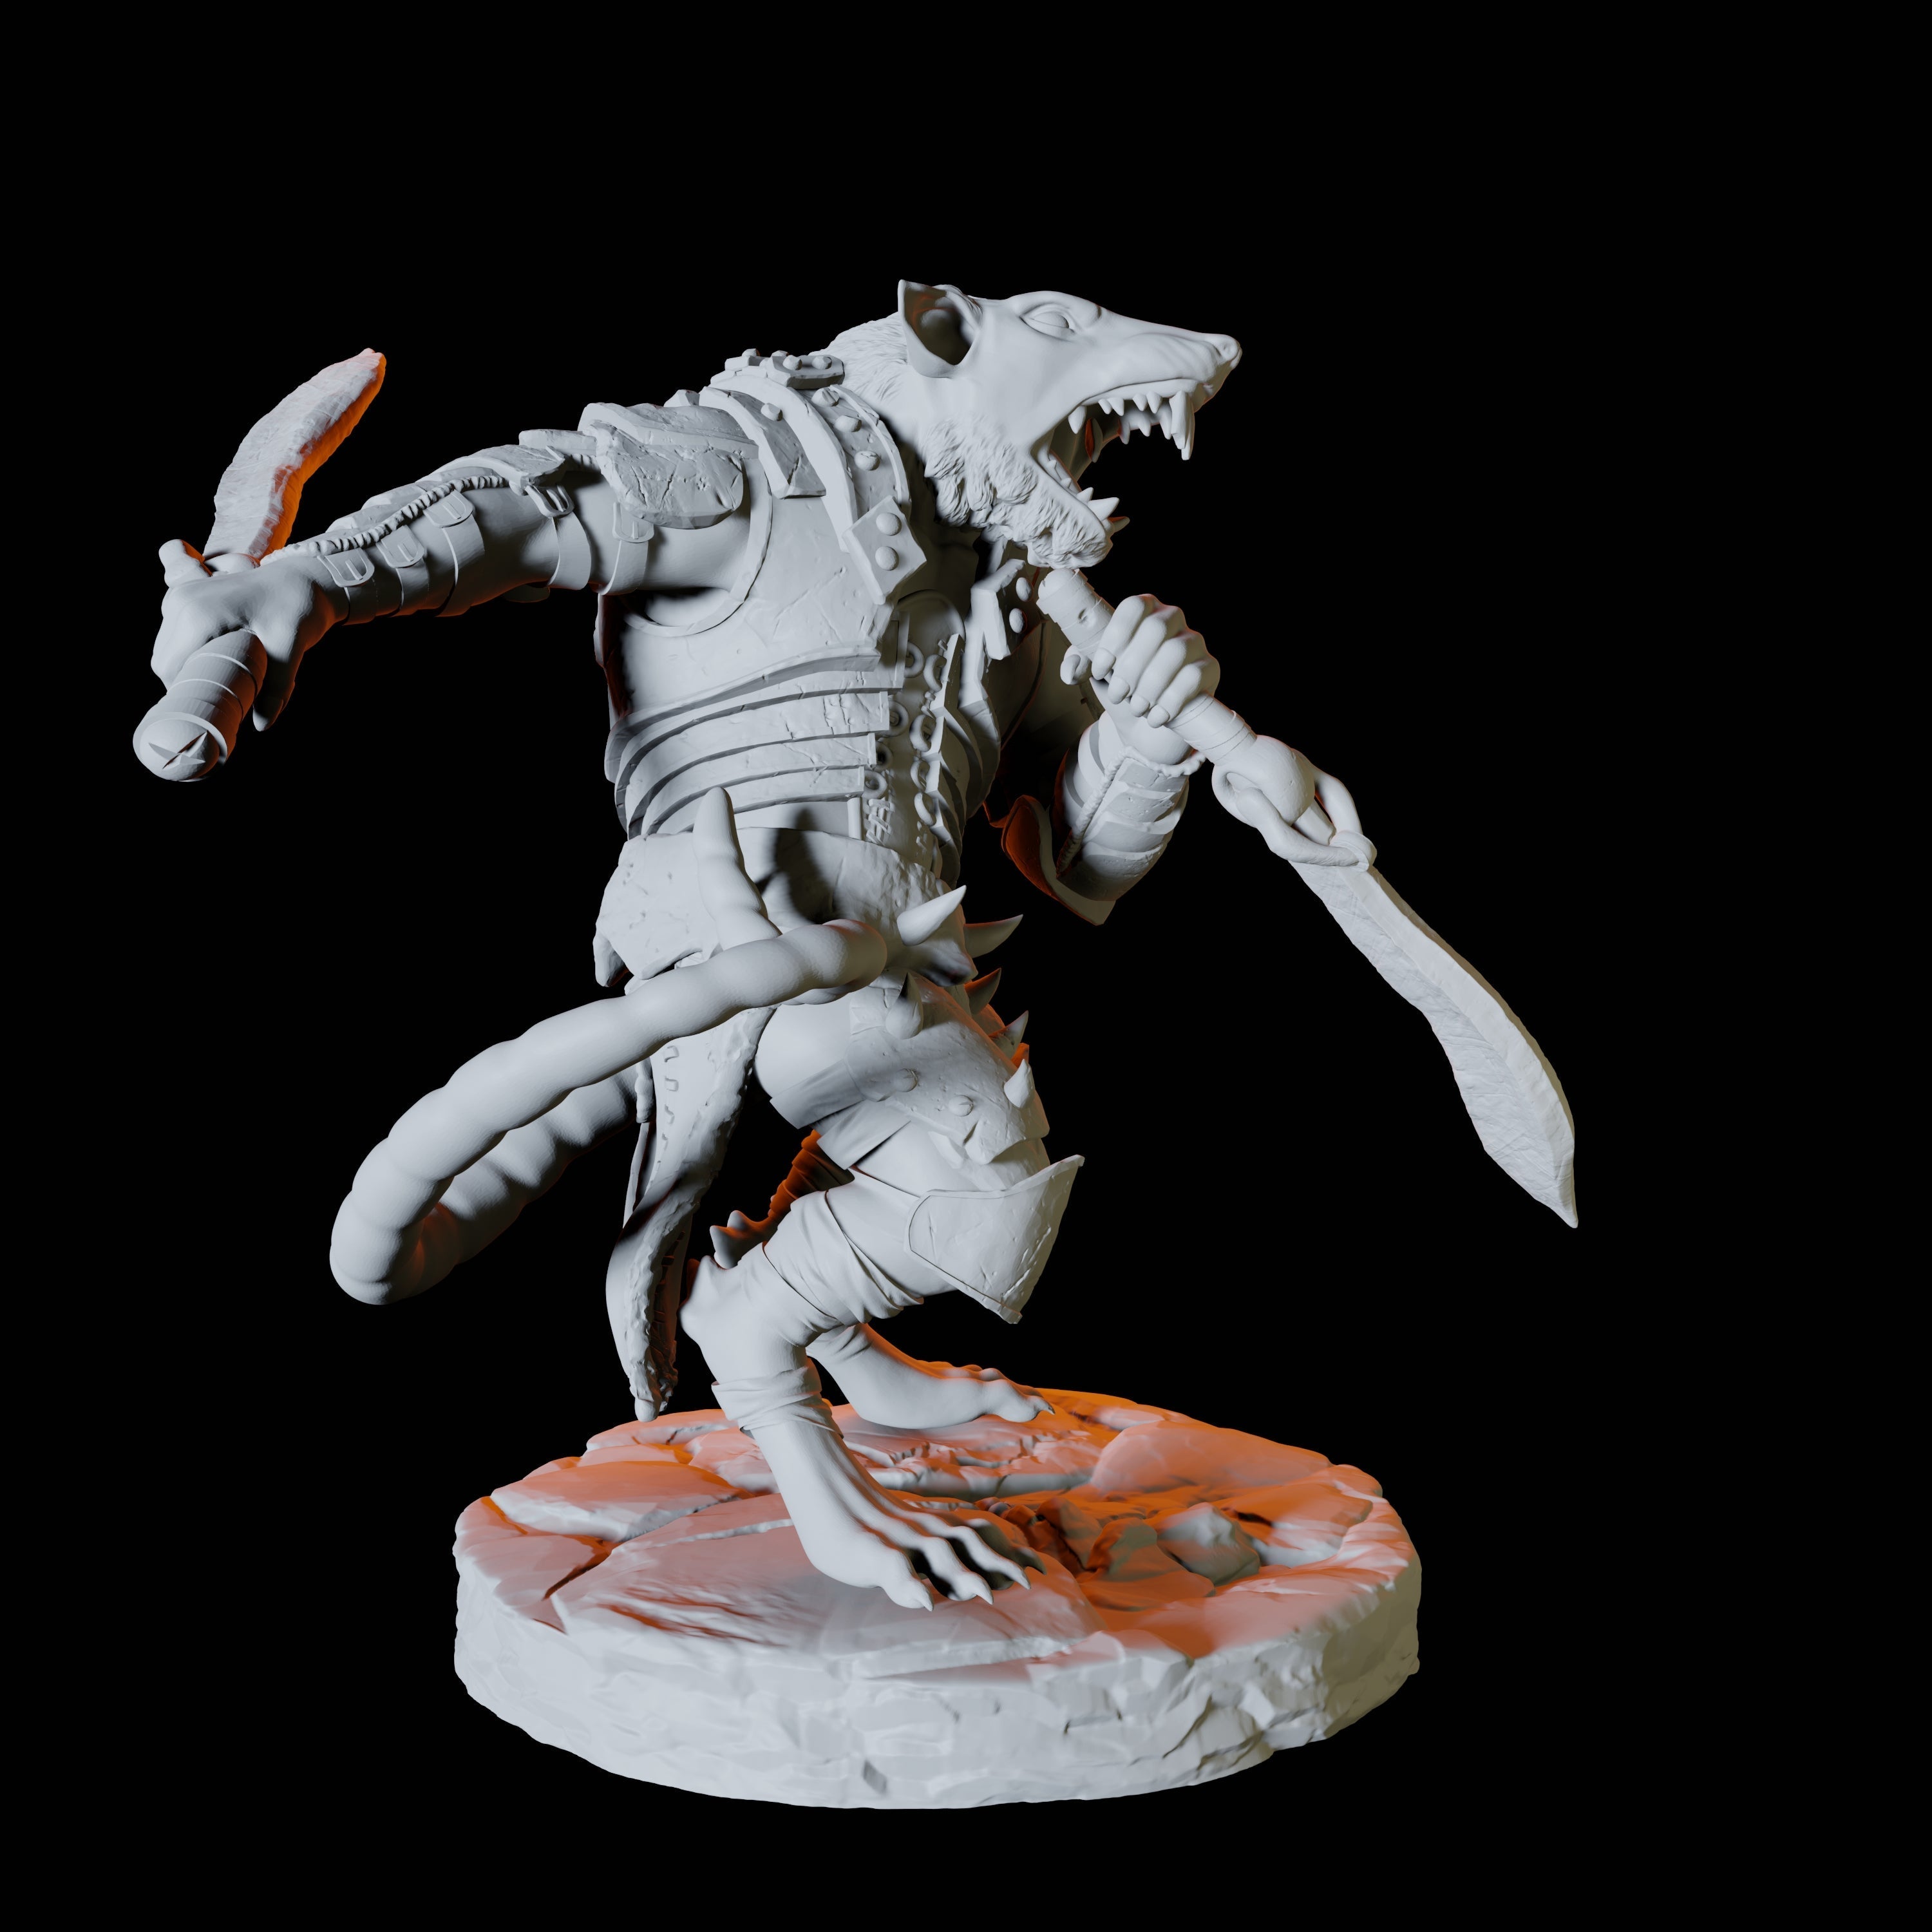 Ratfolk Scout D Miniature for Dungeons and Dragons, Pathfinder or other TTRPGs